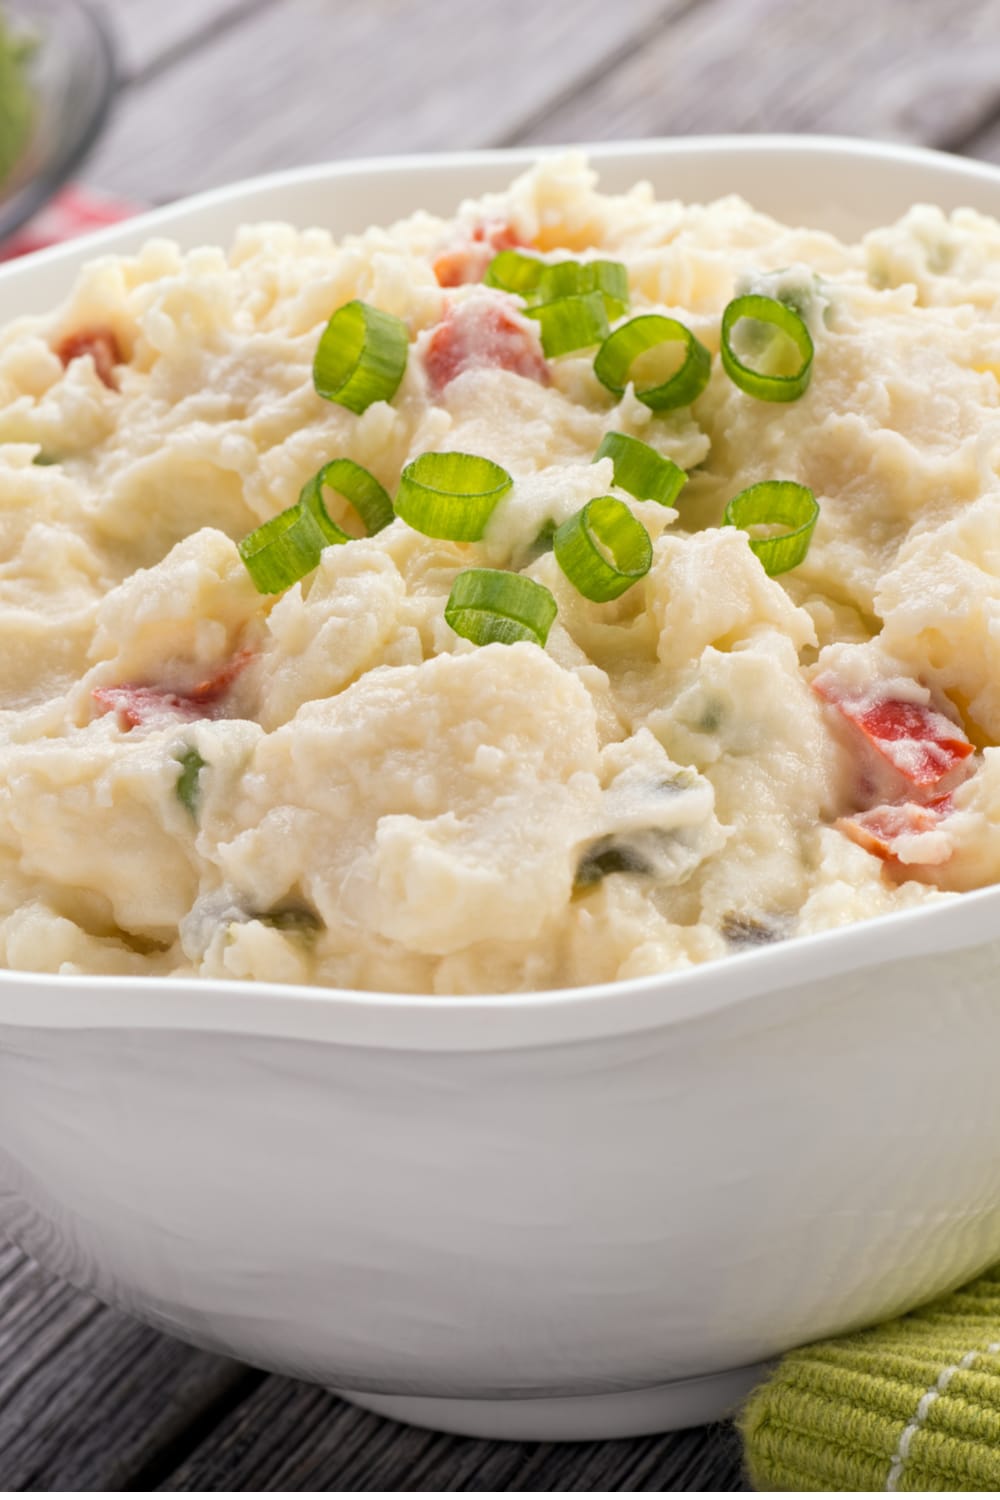 Bowl of Potato Salad with egg and mayonnaise, garnished with chopped green onions